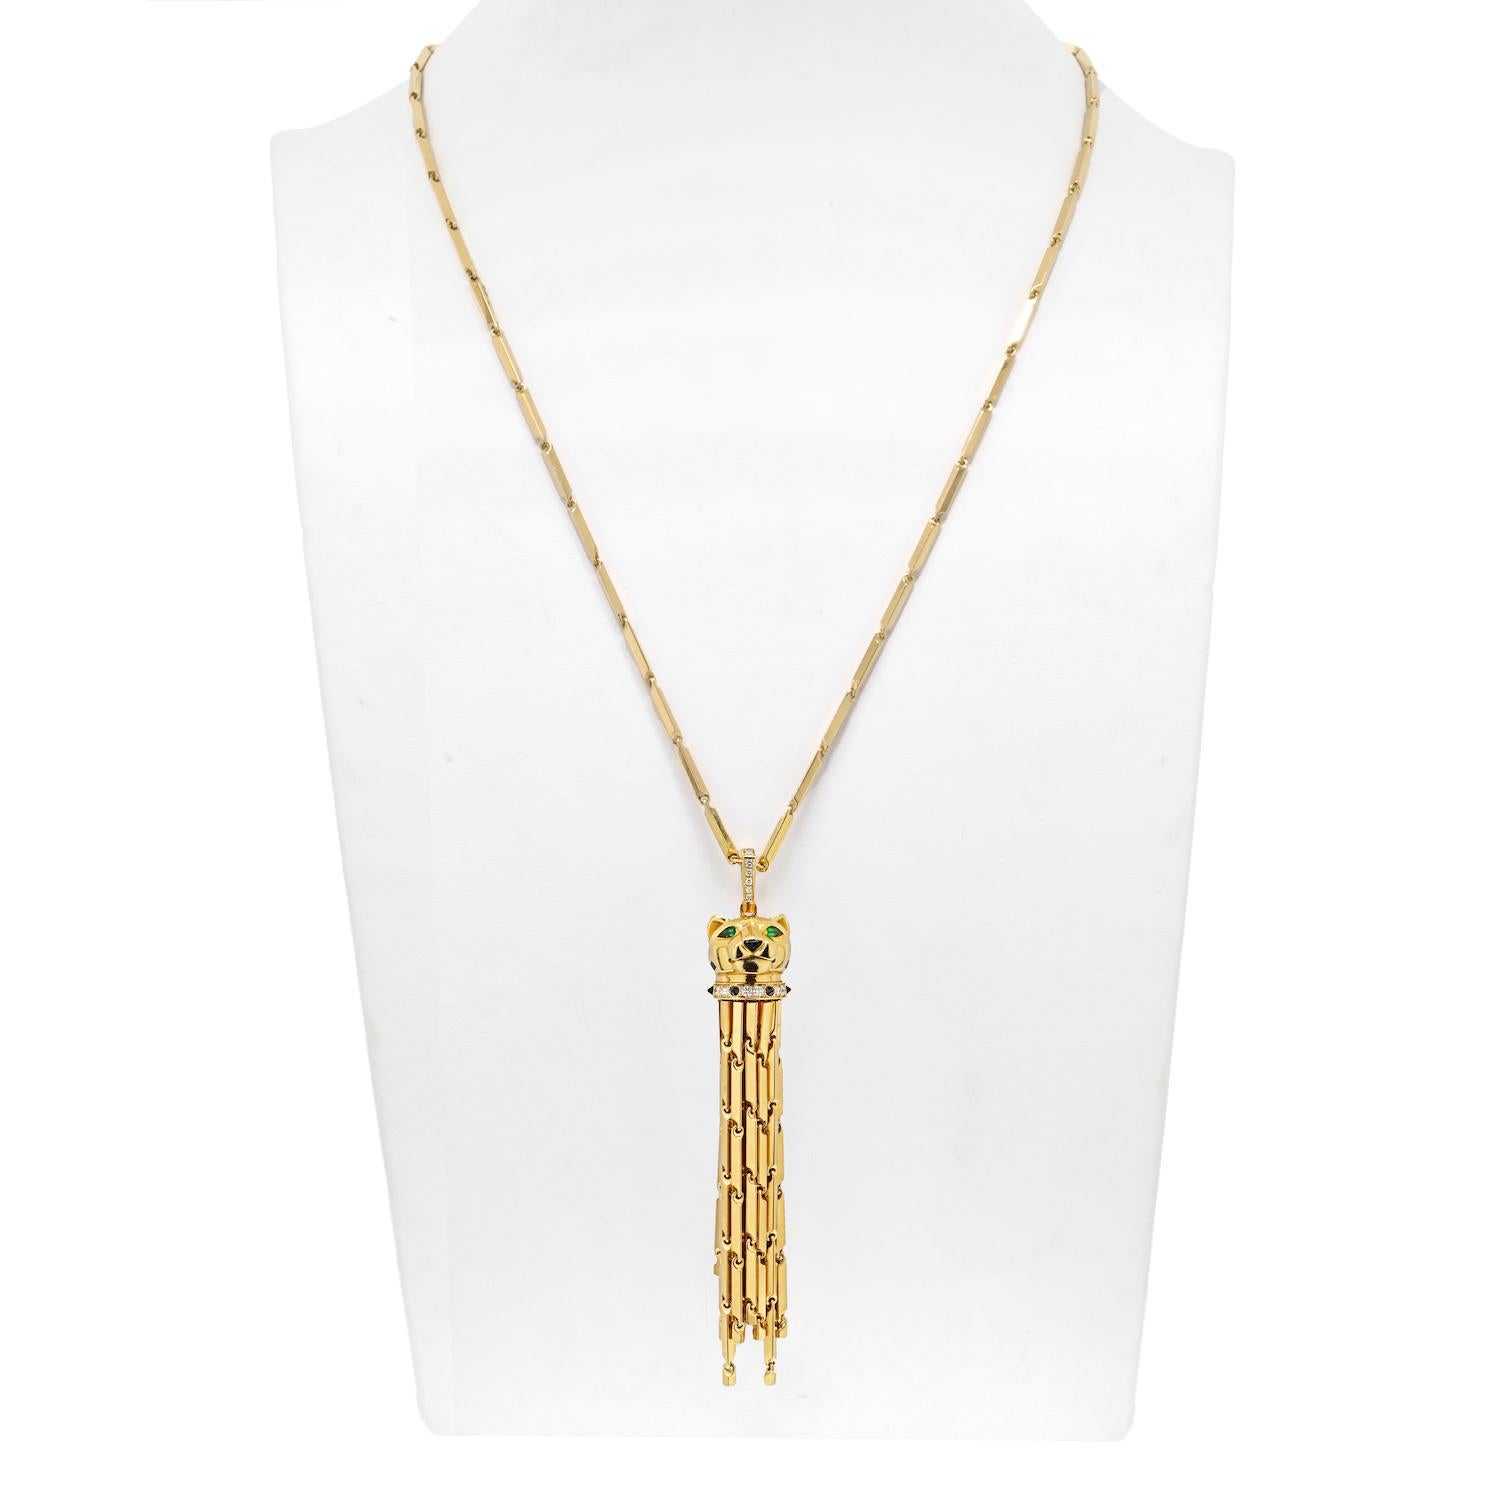 Indulge in the timeless allure of the Cartier Panthère Tassel Pendant, a luxurious piece that combines exquisite materials and meticulous craftsmanship. This pendant captures the essence of Cartier's iconic Panthère design, showcasing a harmonious